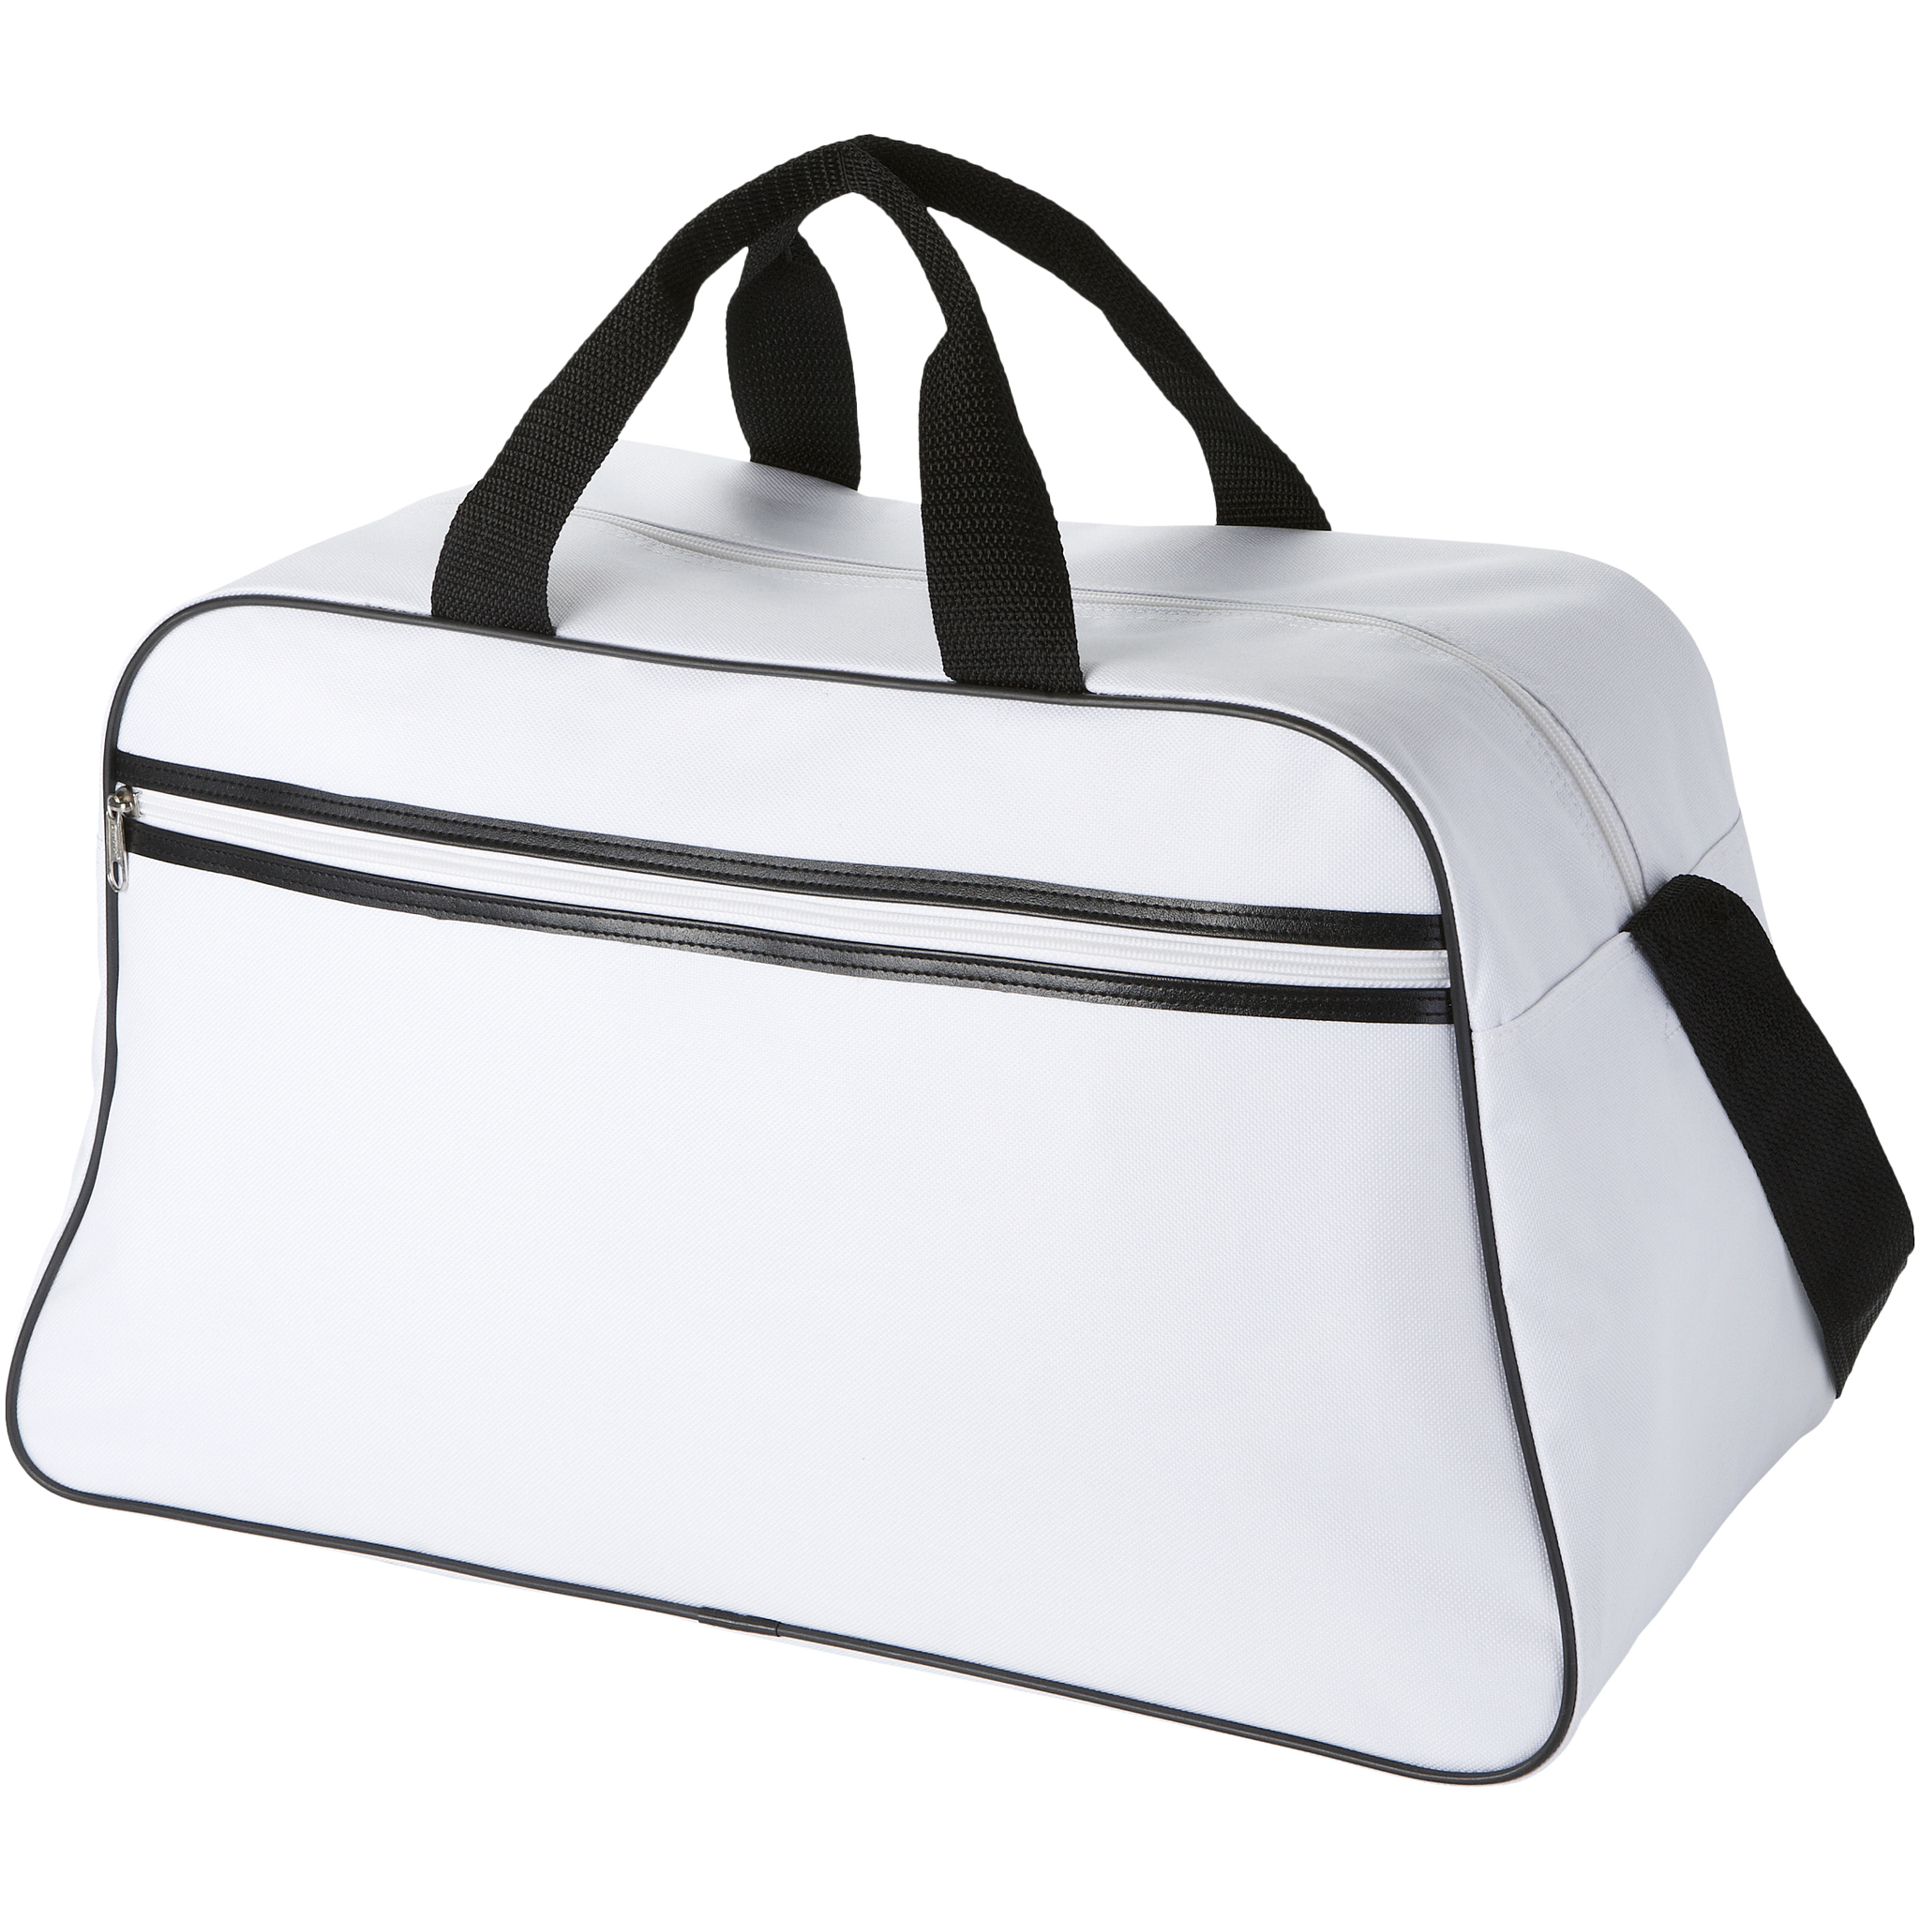 San Jose Sports Bag in white and black